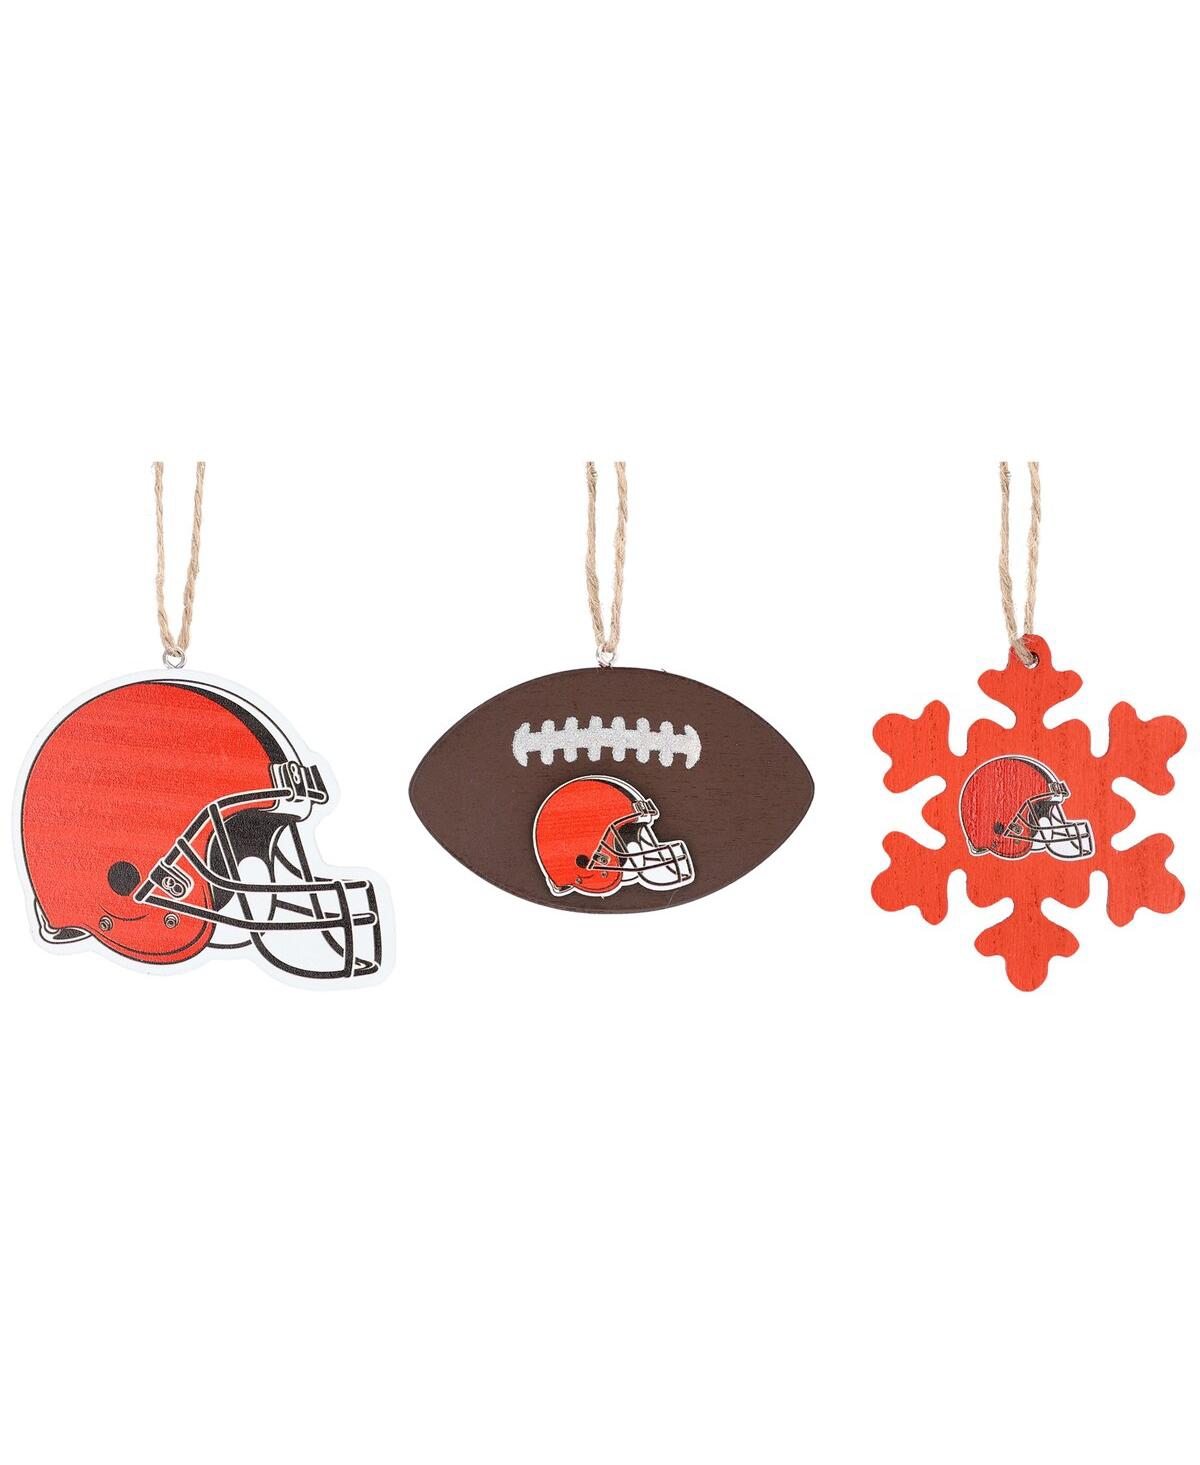 The Memory Company Cleveland Browns Three-Pack Helmet, Football and Snowflake Ornament Set - Multi